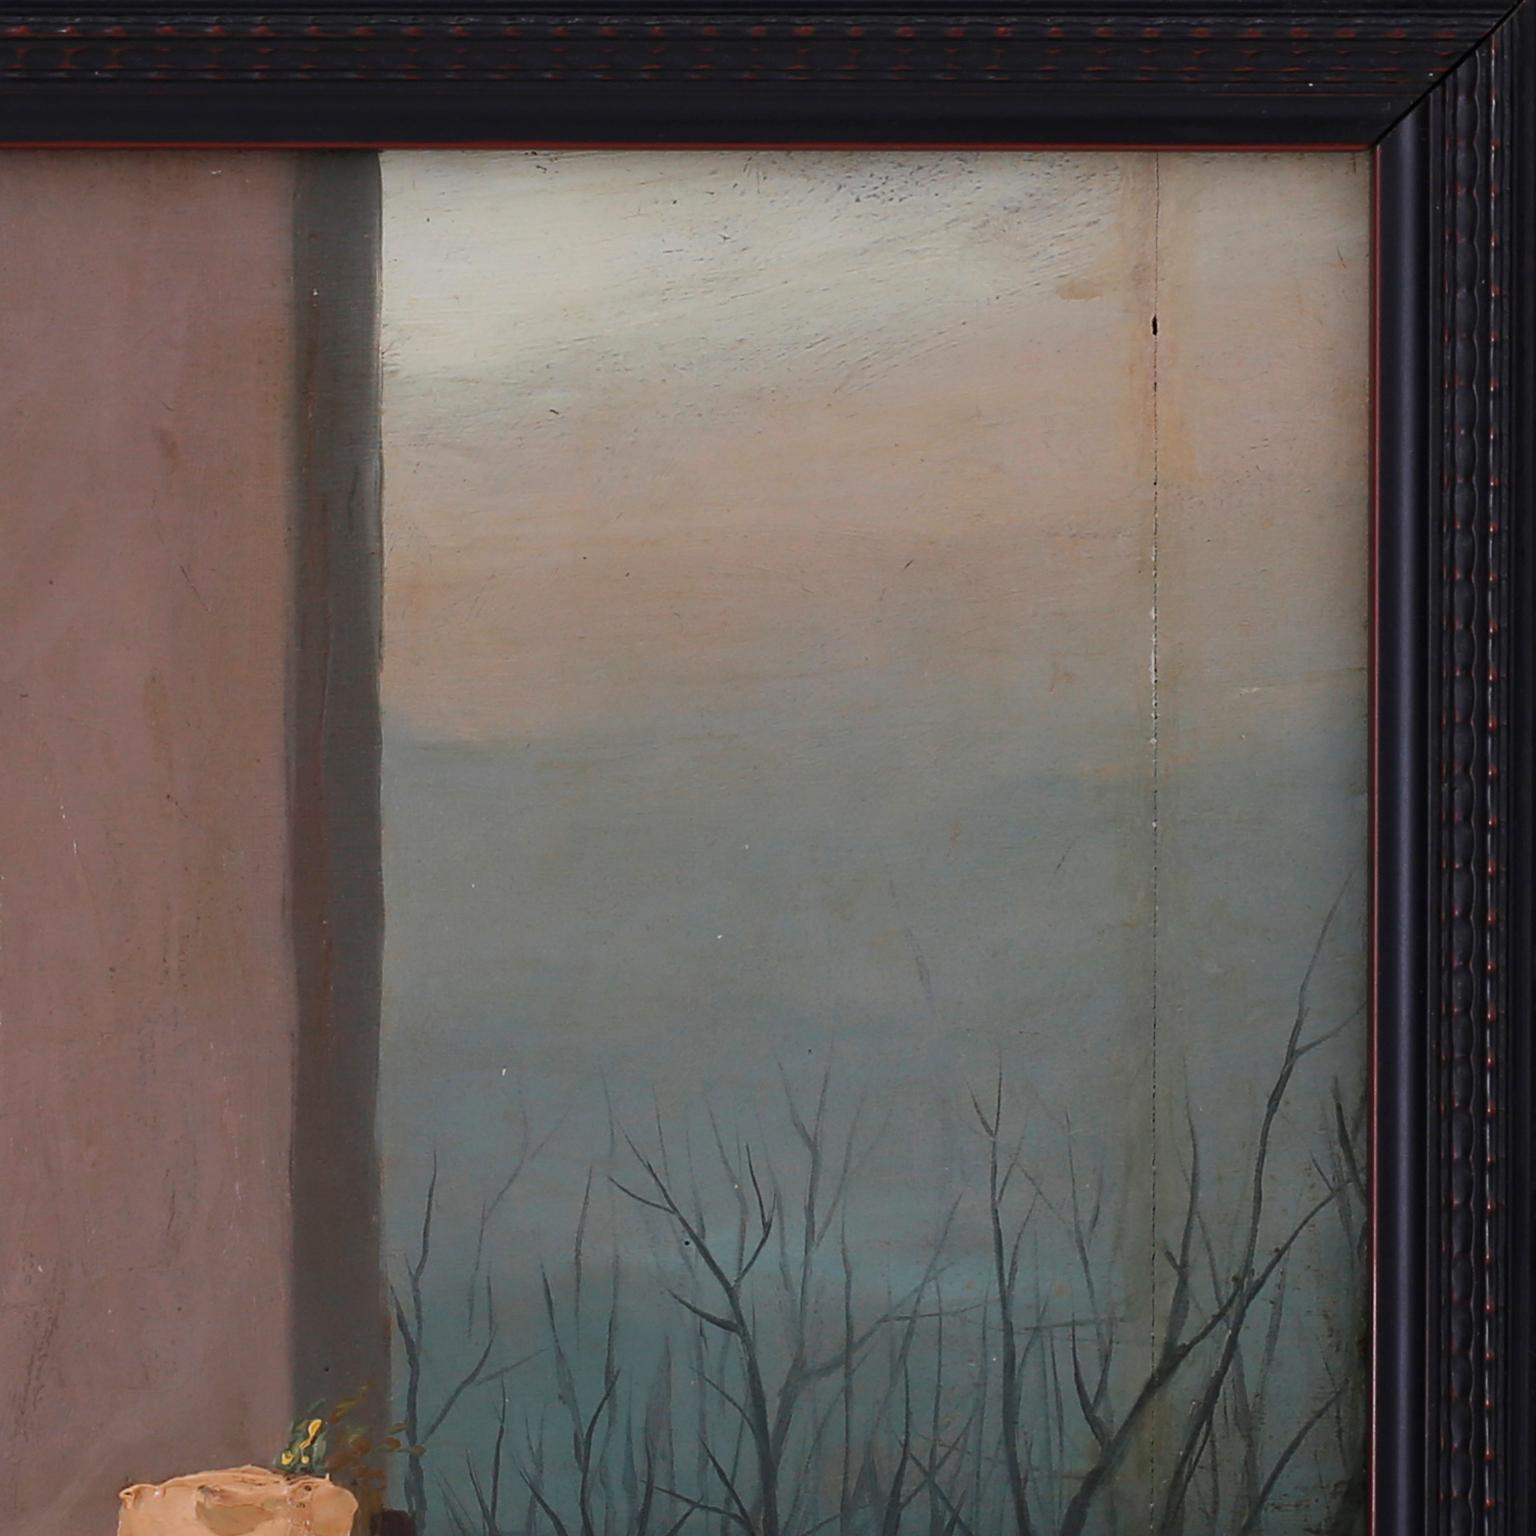 Antique oil painting on board of a white dog caught in a moment of speculation in an outdoor scene. Signed William Melbon and presented in a newer ebonized wood frame.